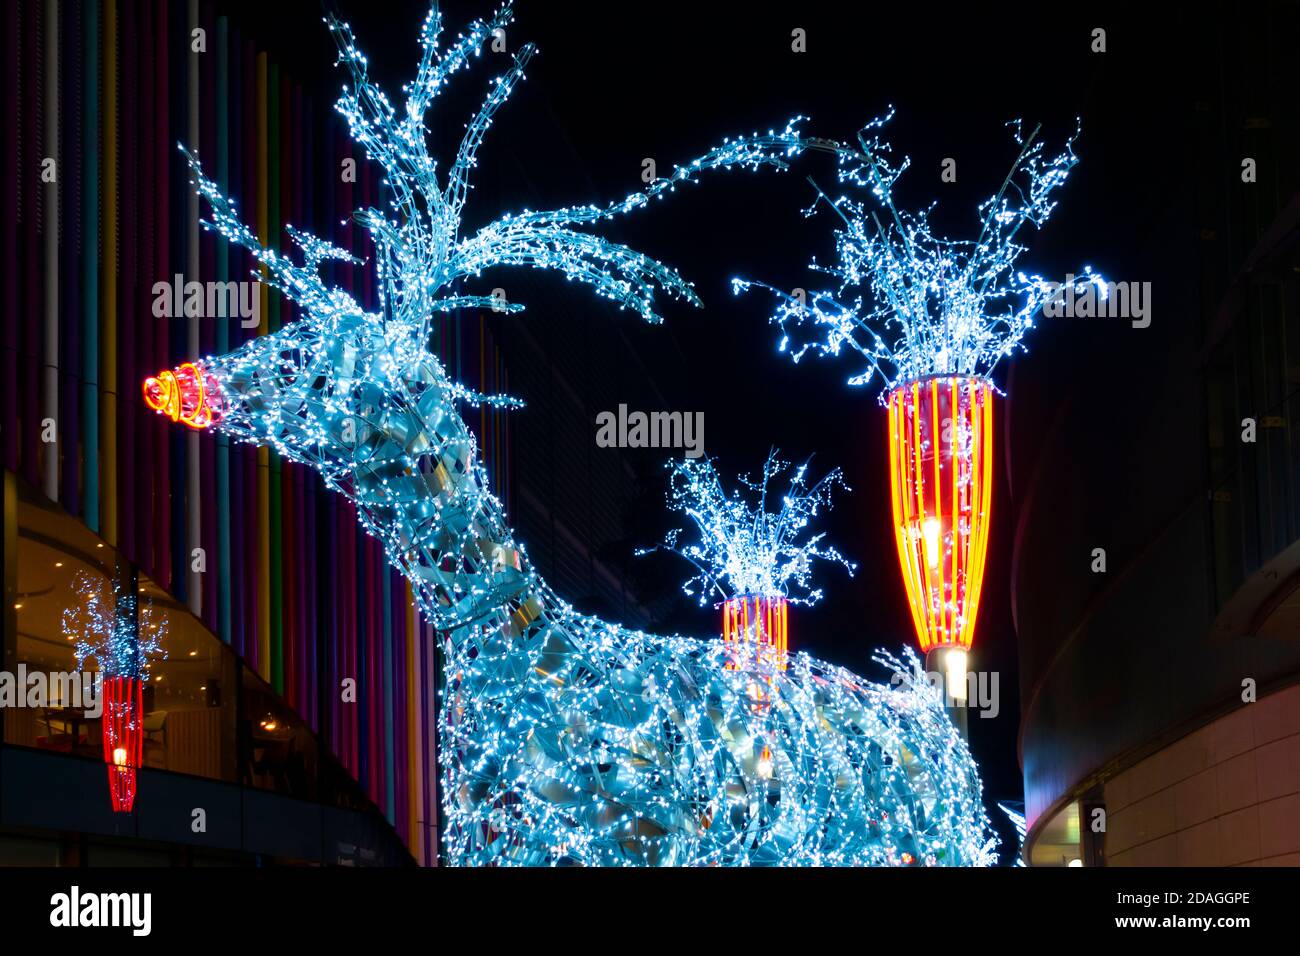 Rudolph the Red-Nosed Reindeer at the entrance to Liverpool One Shopping Centre Stock Photo